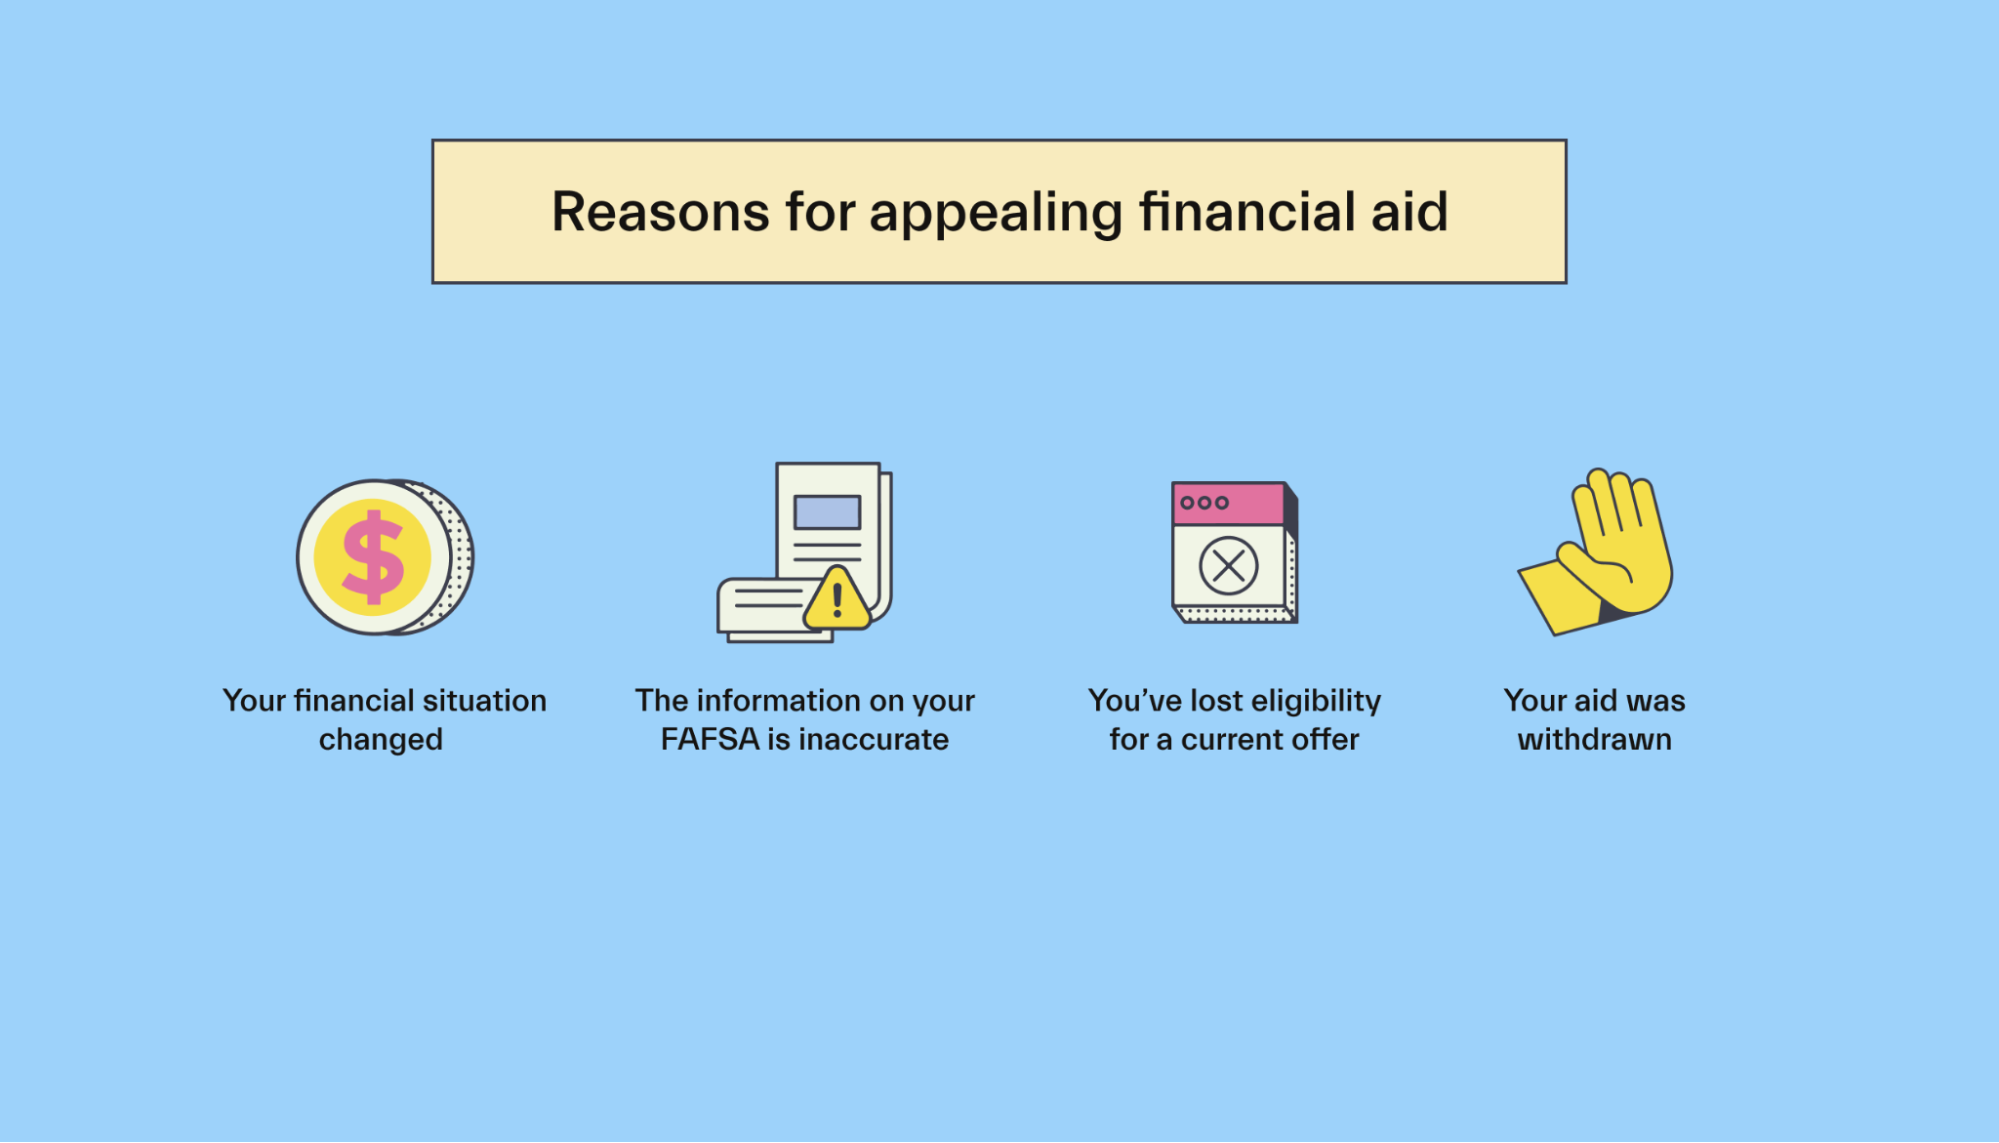 4 reasons for appealing financial aid